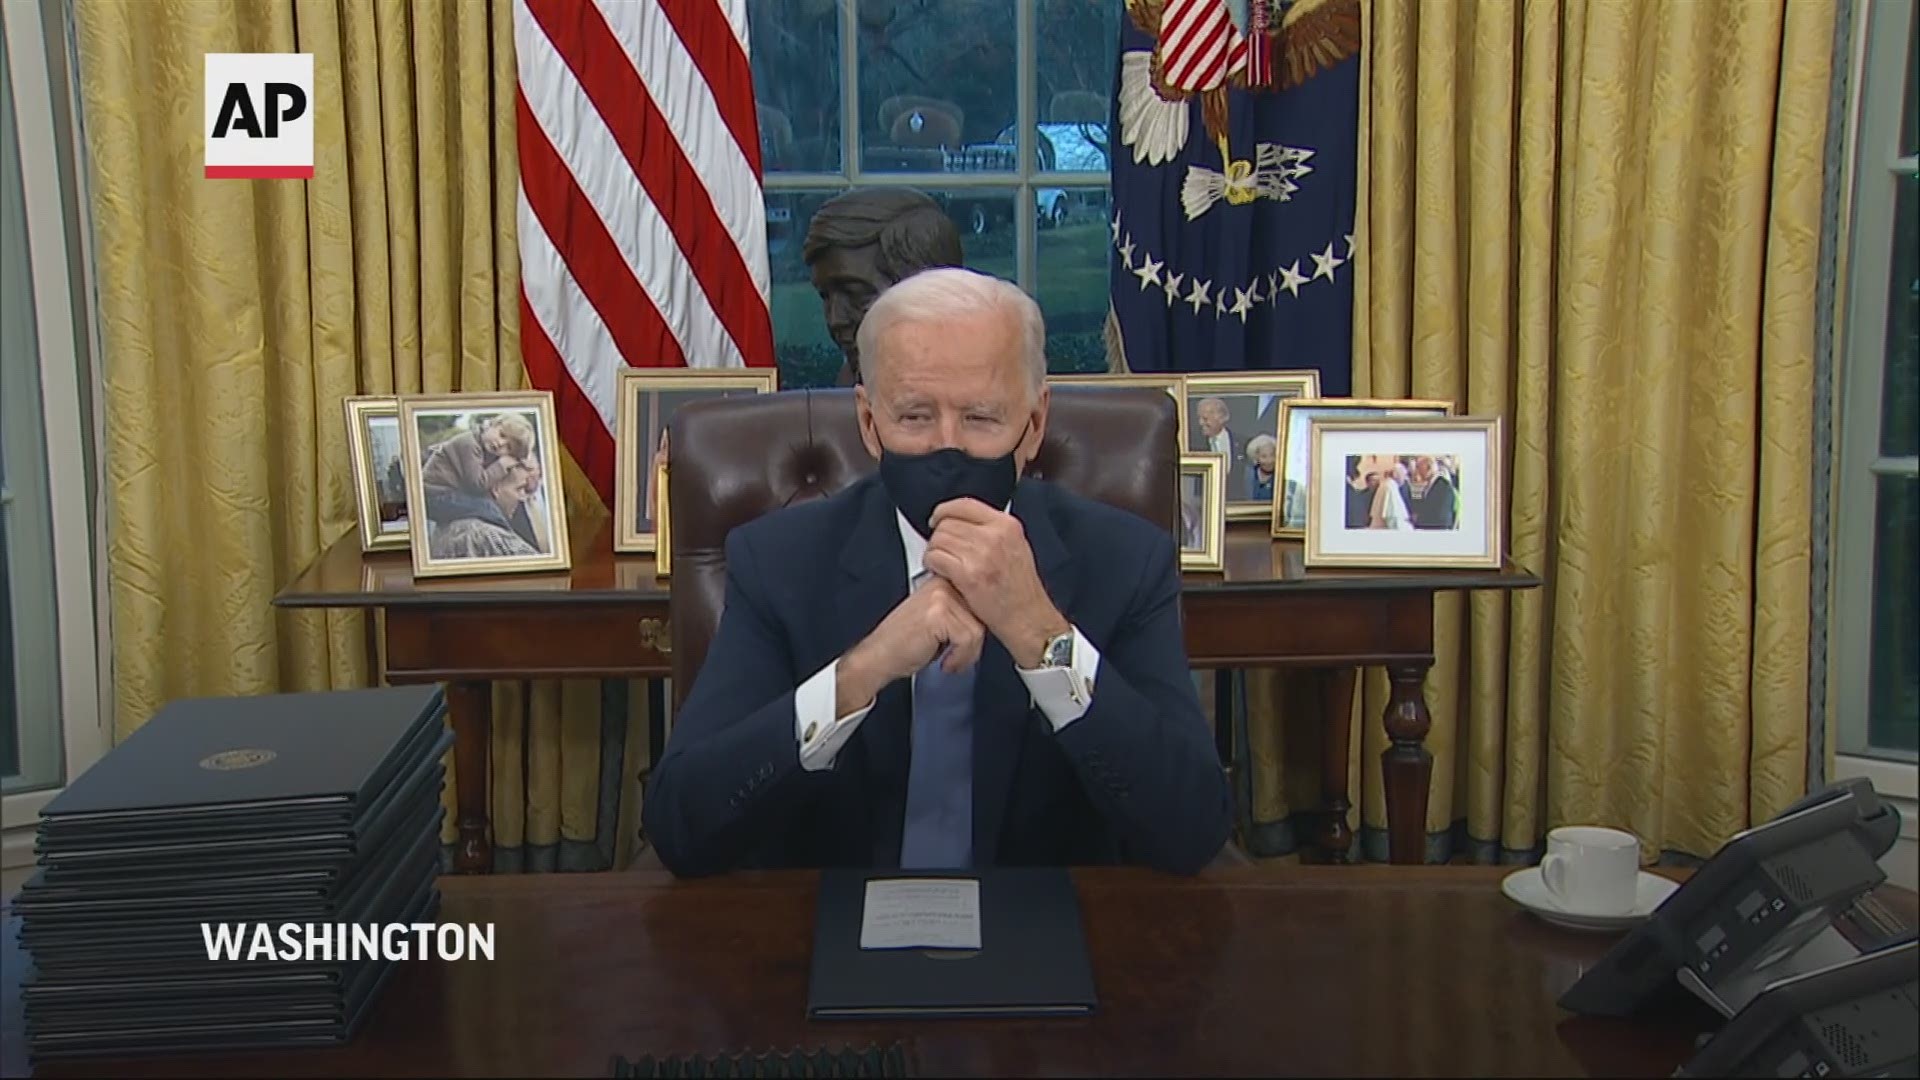 In his first hours as president, Joe Biden struck at the heart of President Donald Trump’s policy legacy, signing executive actions that reverse his predecessor.